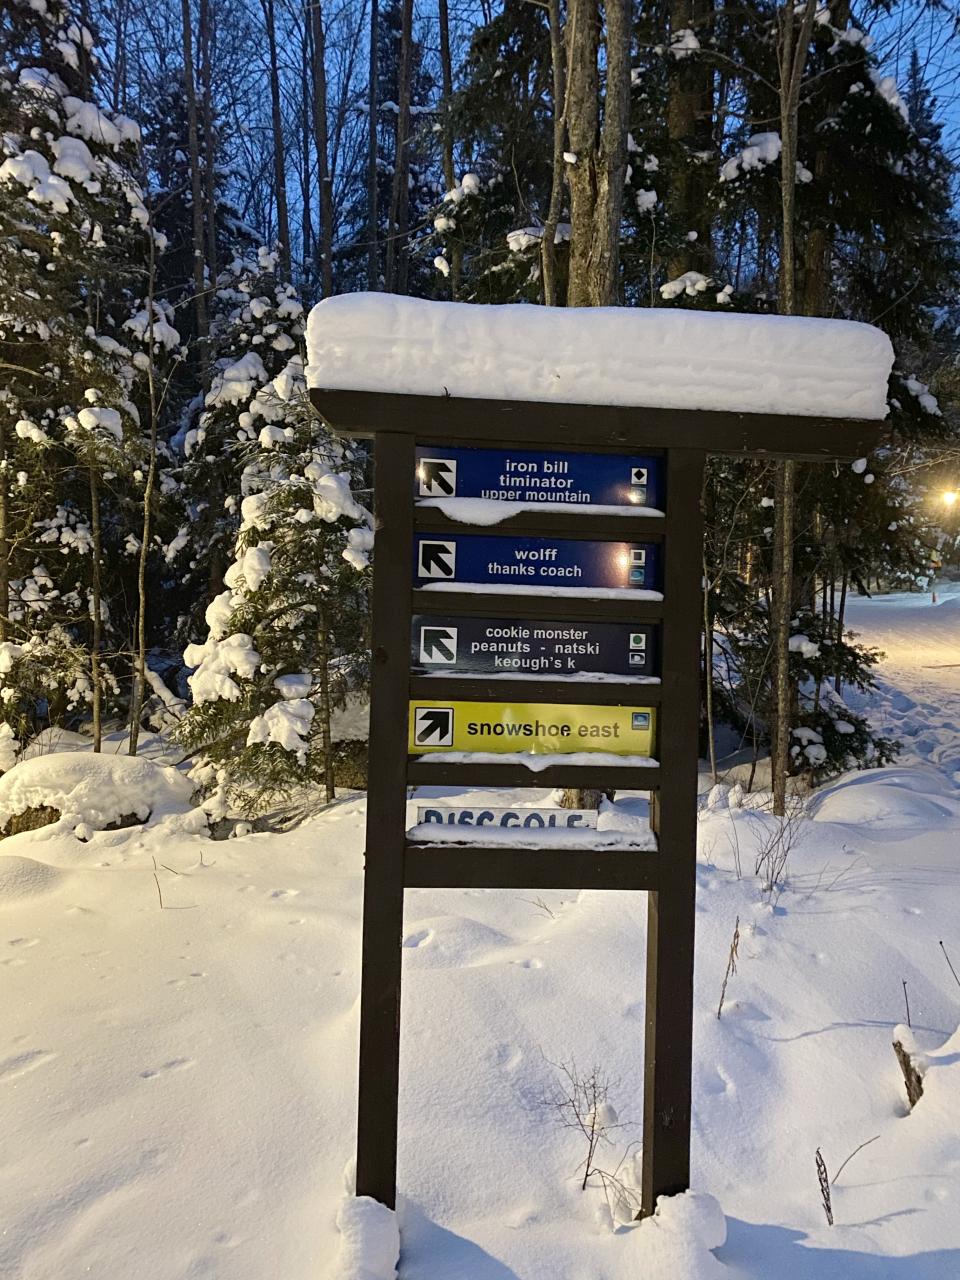 Signage at Dewey provides guidance on trail locations and difficulty.